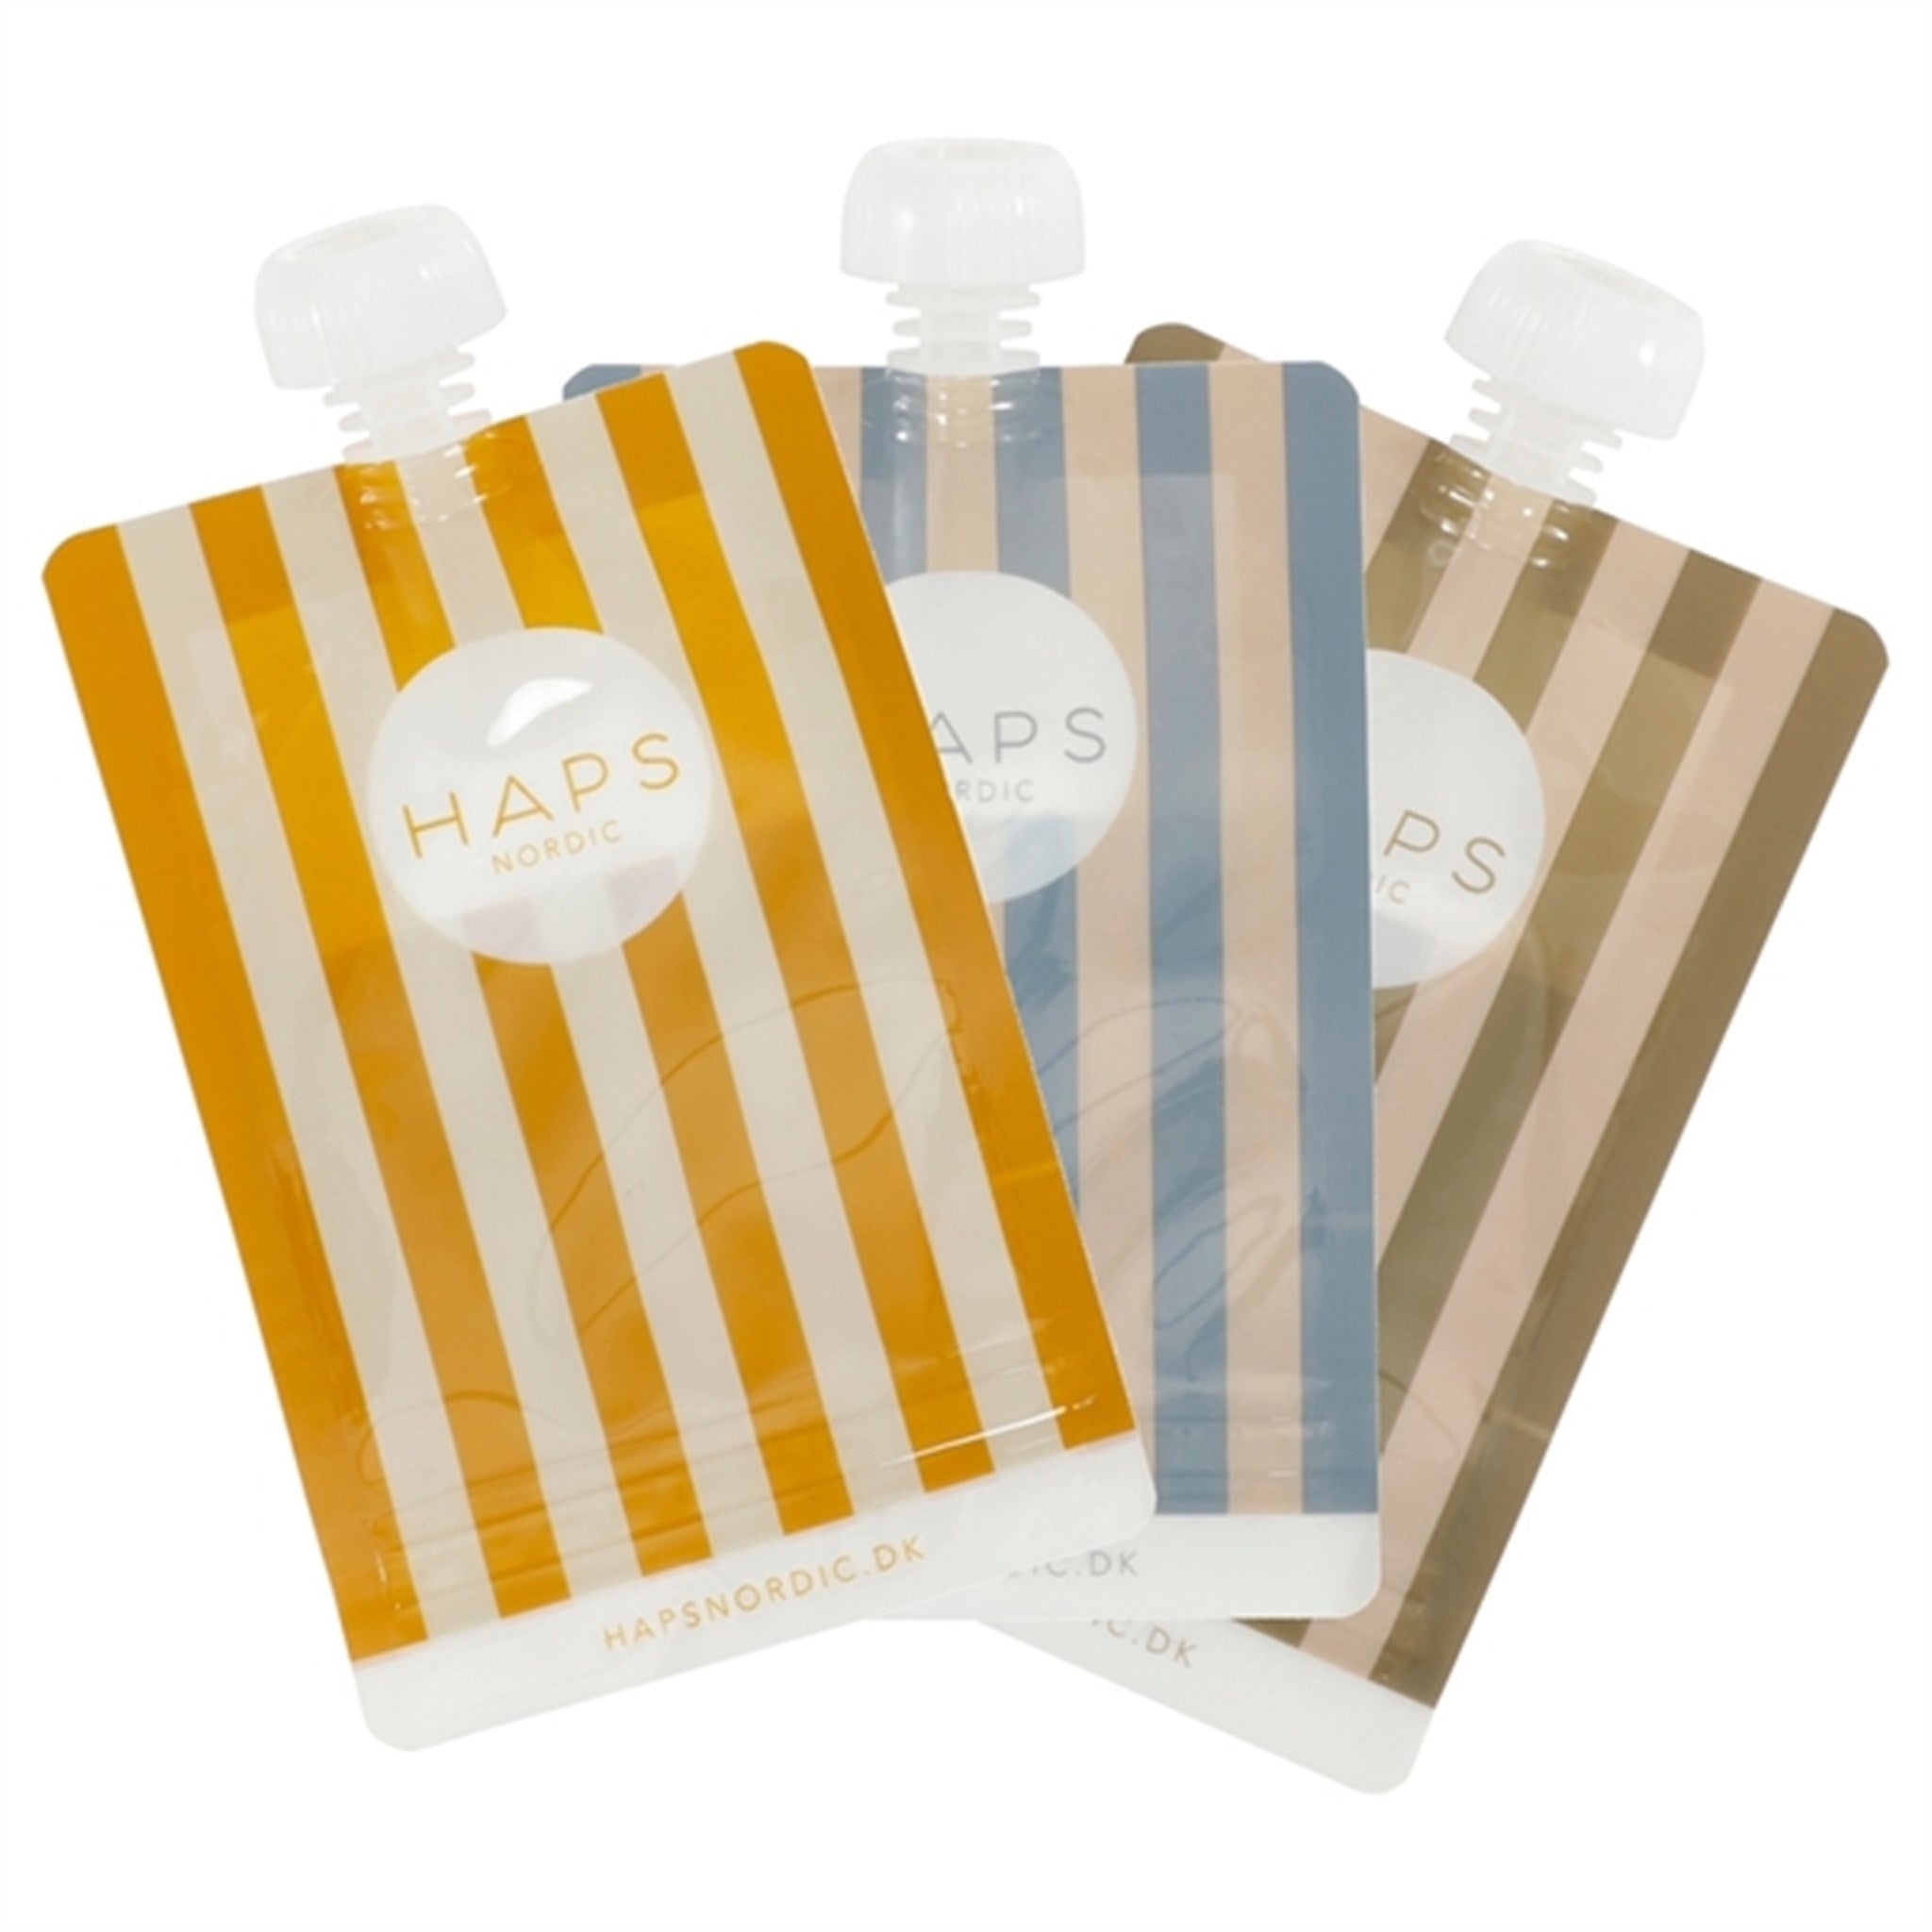 Haps Nordic Smoothie Bags 3-pack Marine Stripe Cold